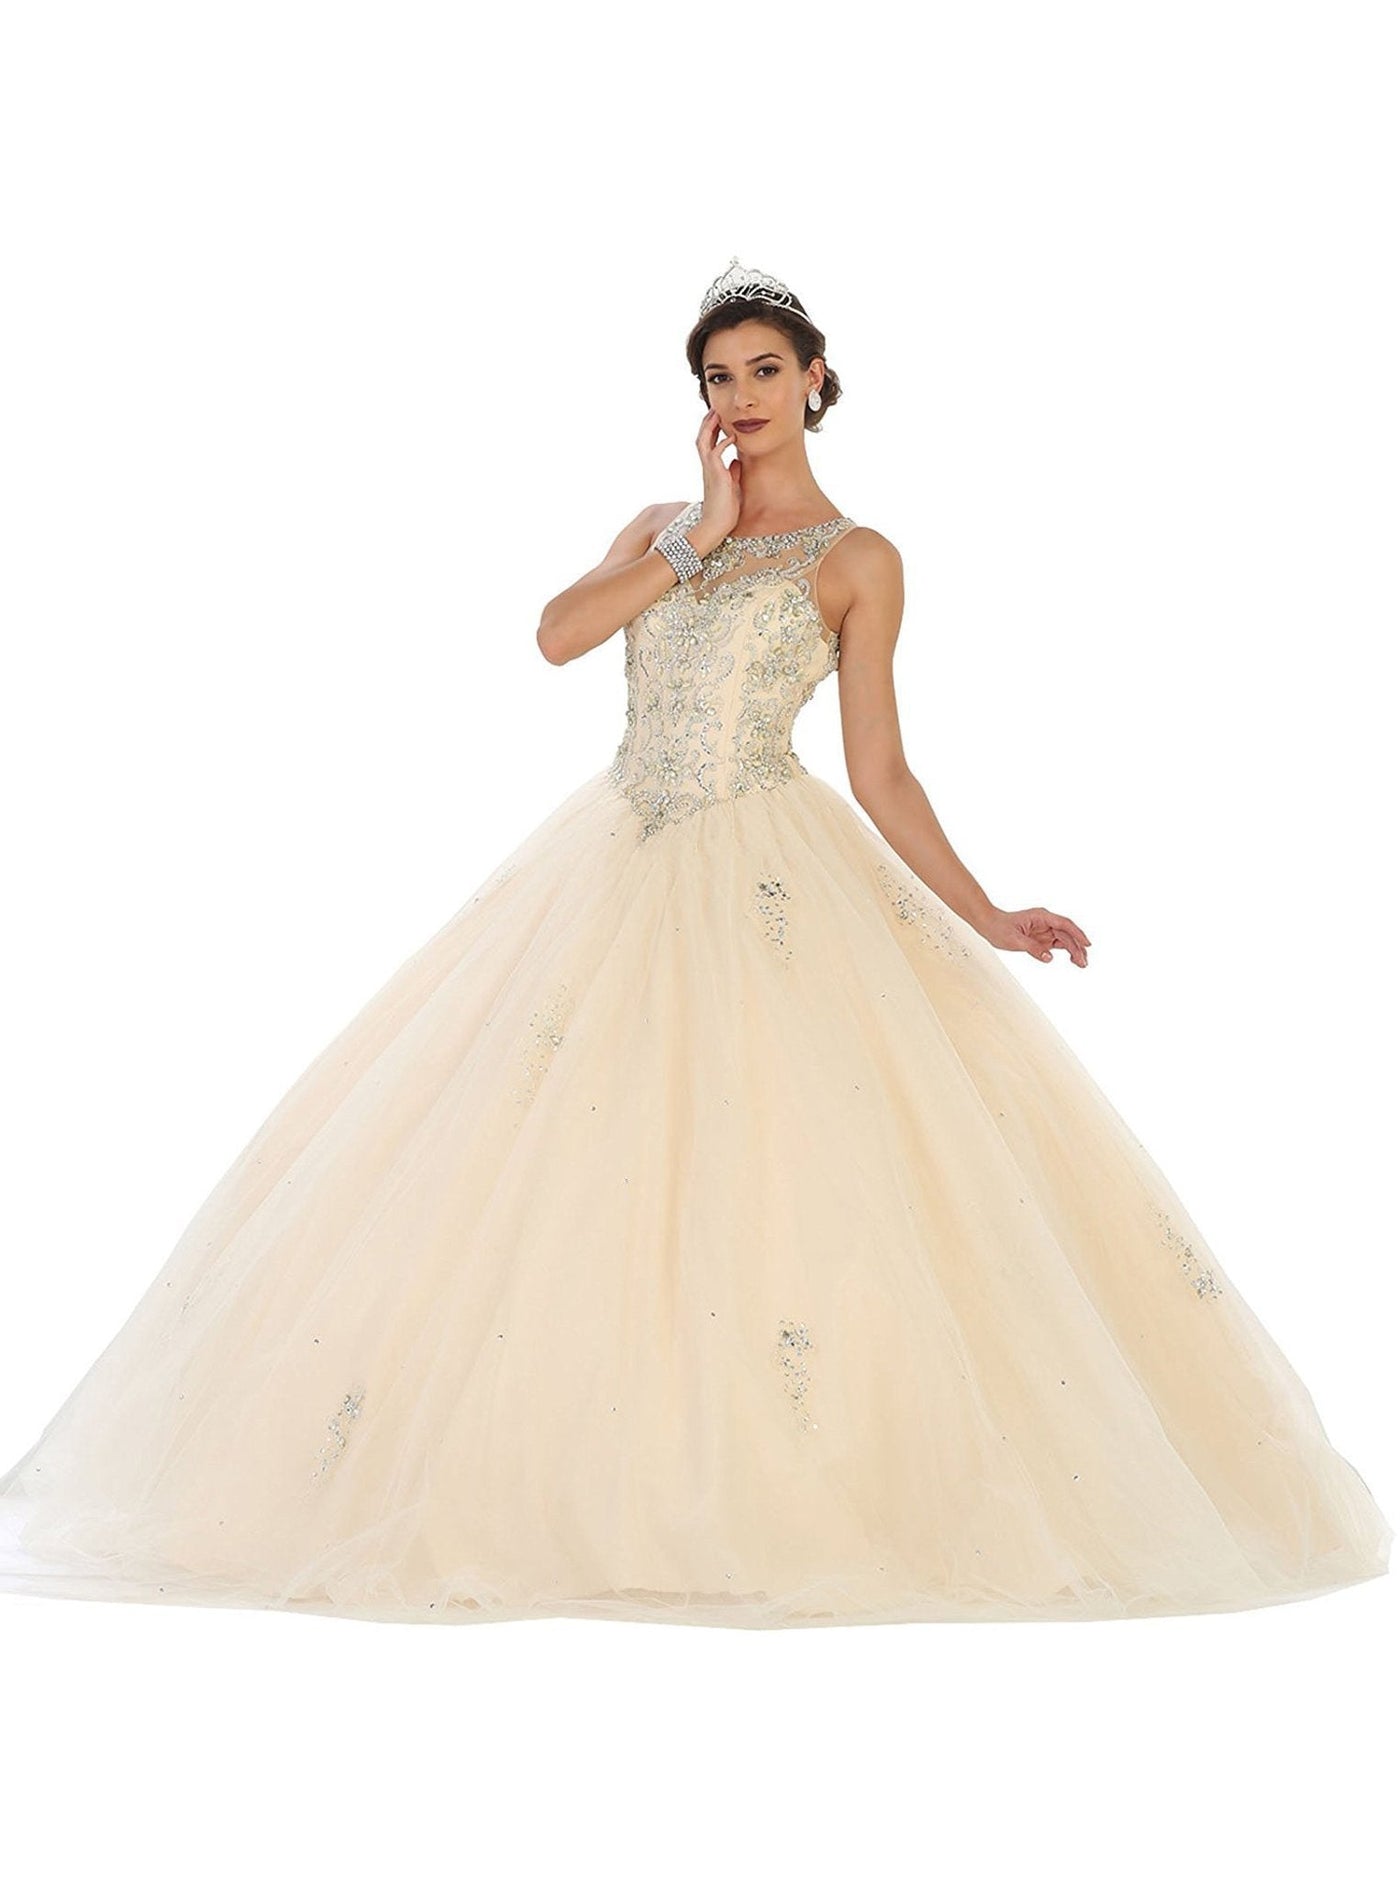 May Queen - Crystal Embellished Jewel Quinceanera Ballgown Quinceanera Dresses 2 / Champagne